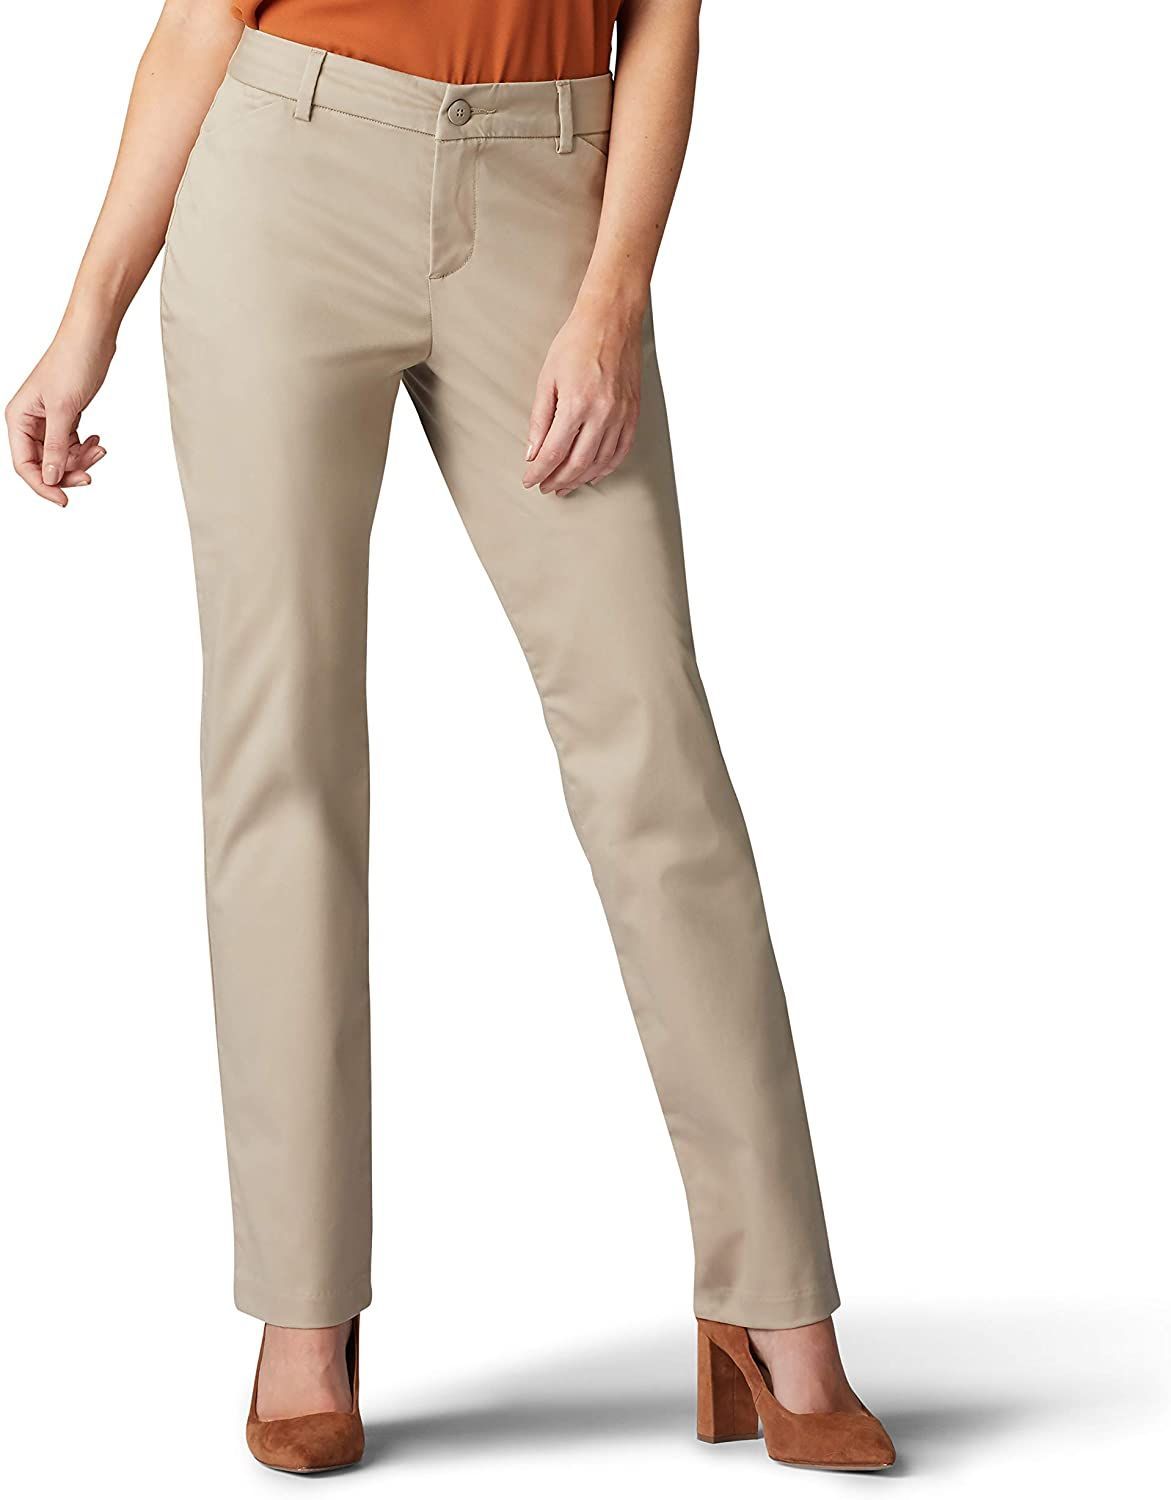 CLIV Women's Dress Pants Skinny Leg Work Pants Pull on Stretch Ease into Comfort Office Pant